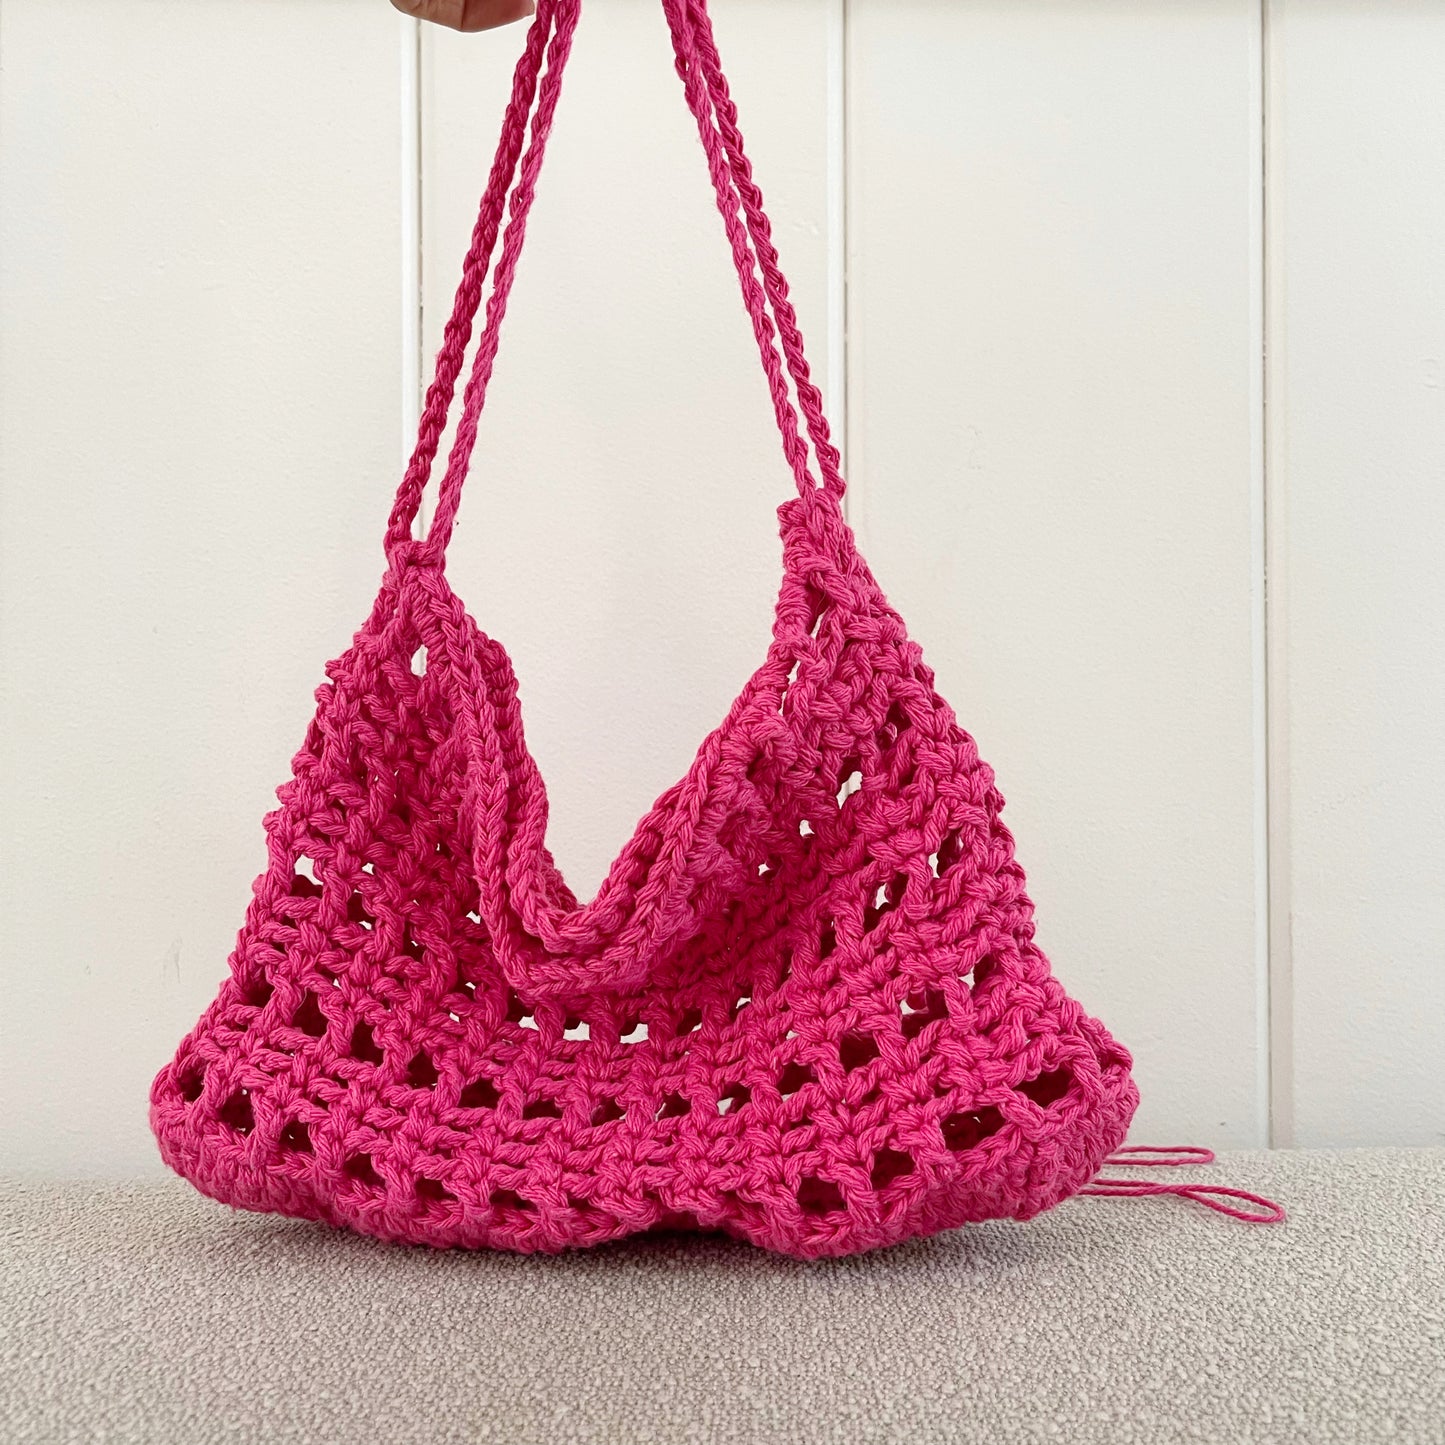 A picture of a crochet mesh handbag in hot pink  Measures 11" wide x 8" tall + a shoulder strap. Made of 100% cotton.   